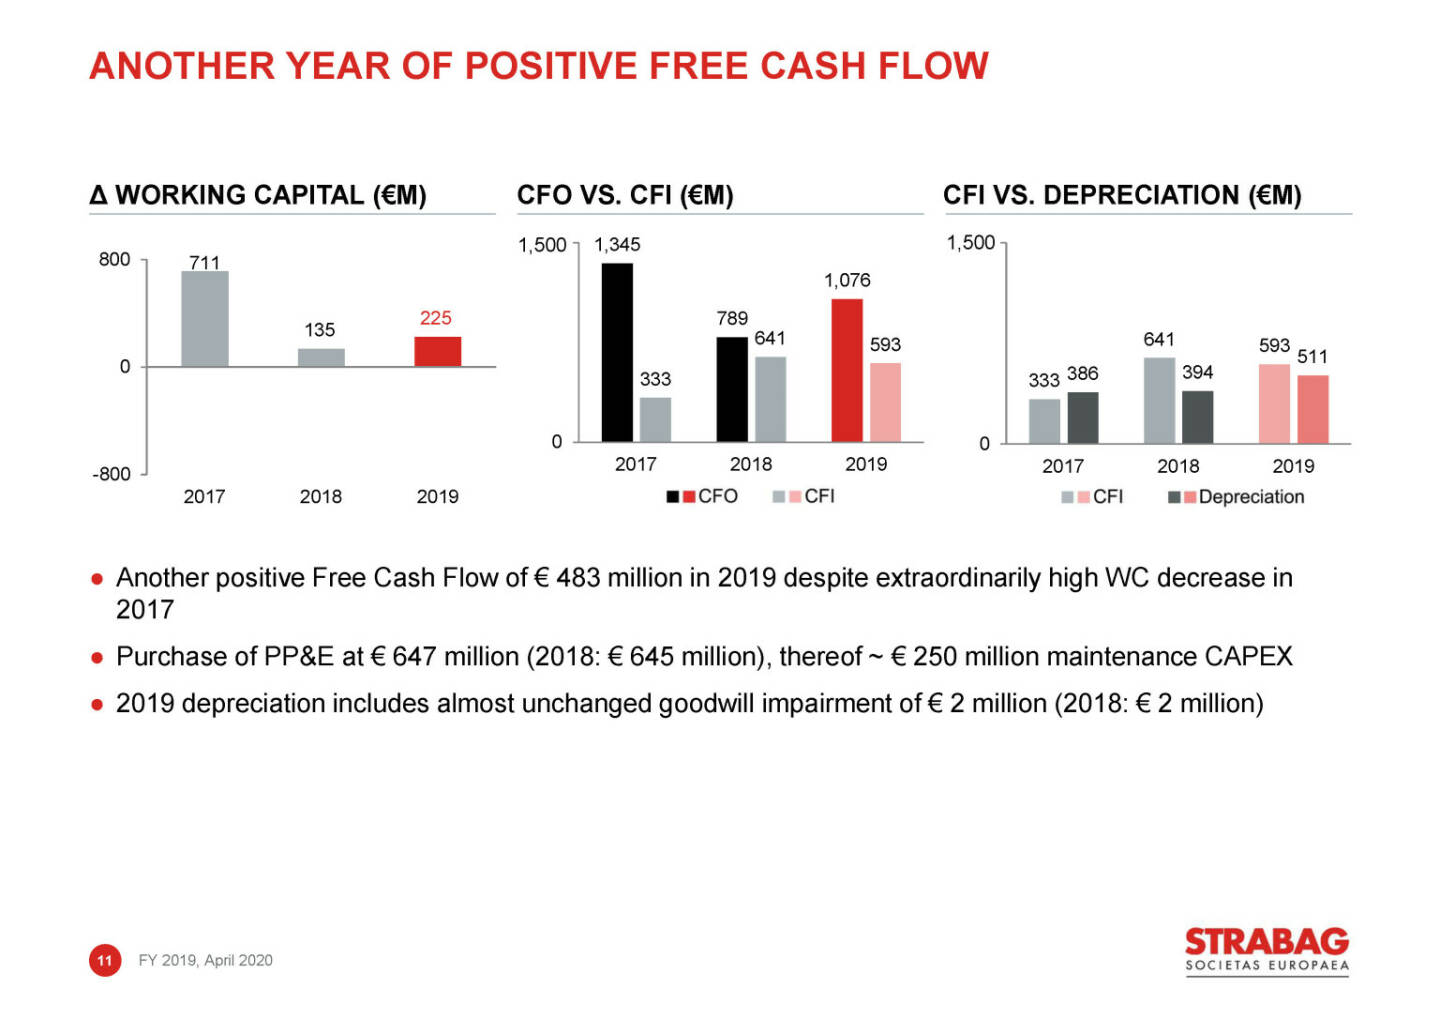 Strabag - another year of positive free cash flow